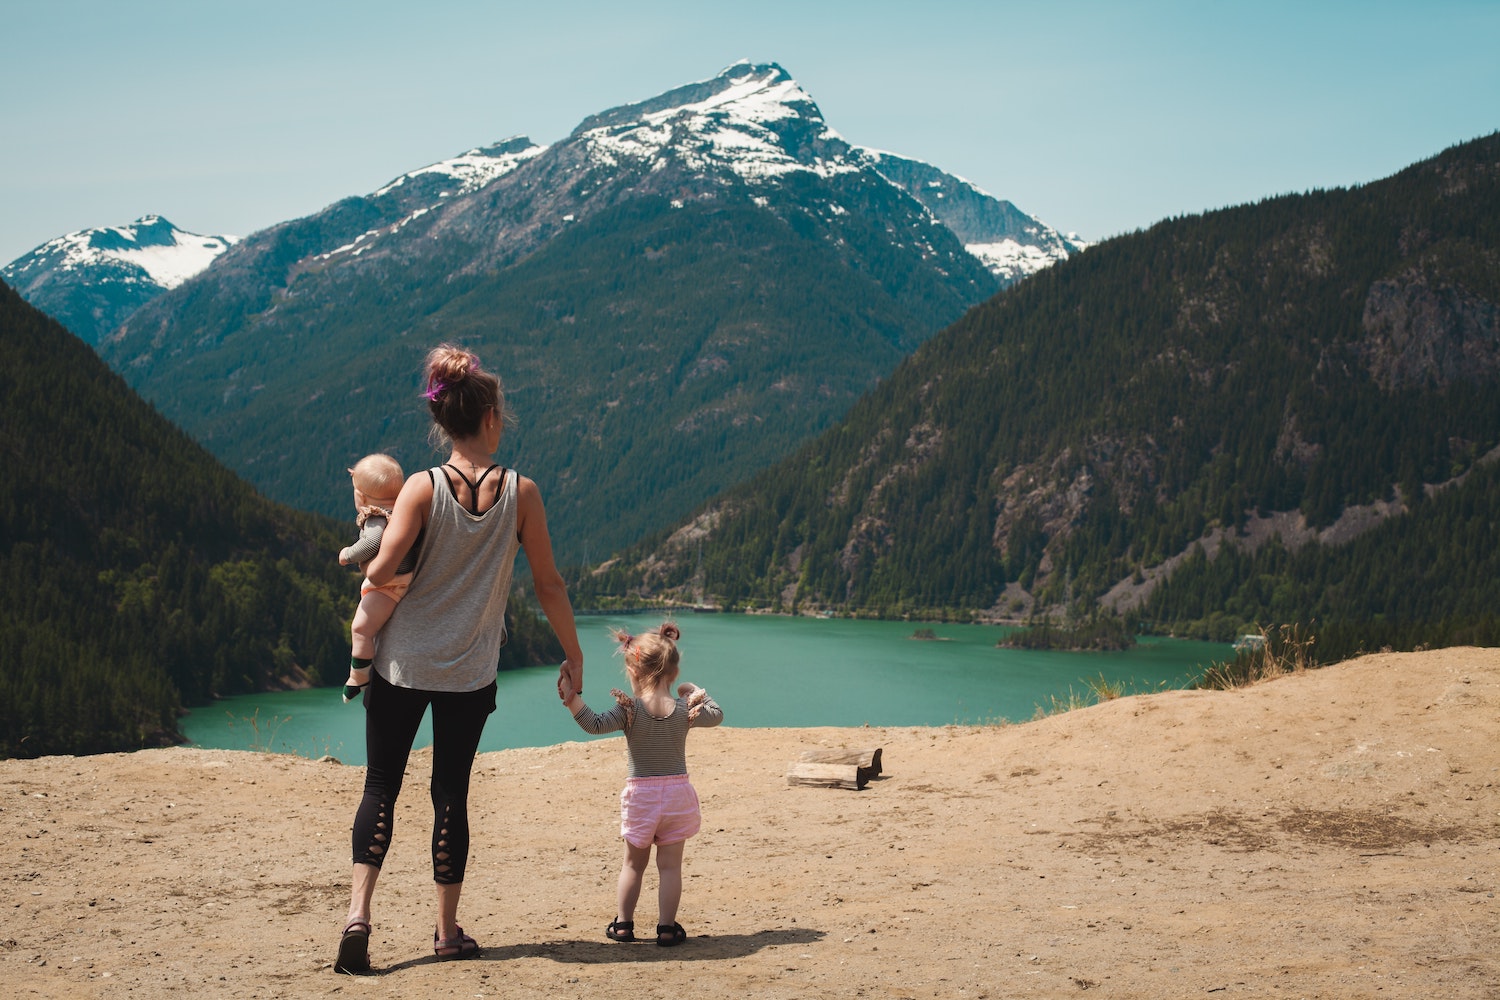 Millennial Parents: The New Generation of Family Travel